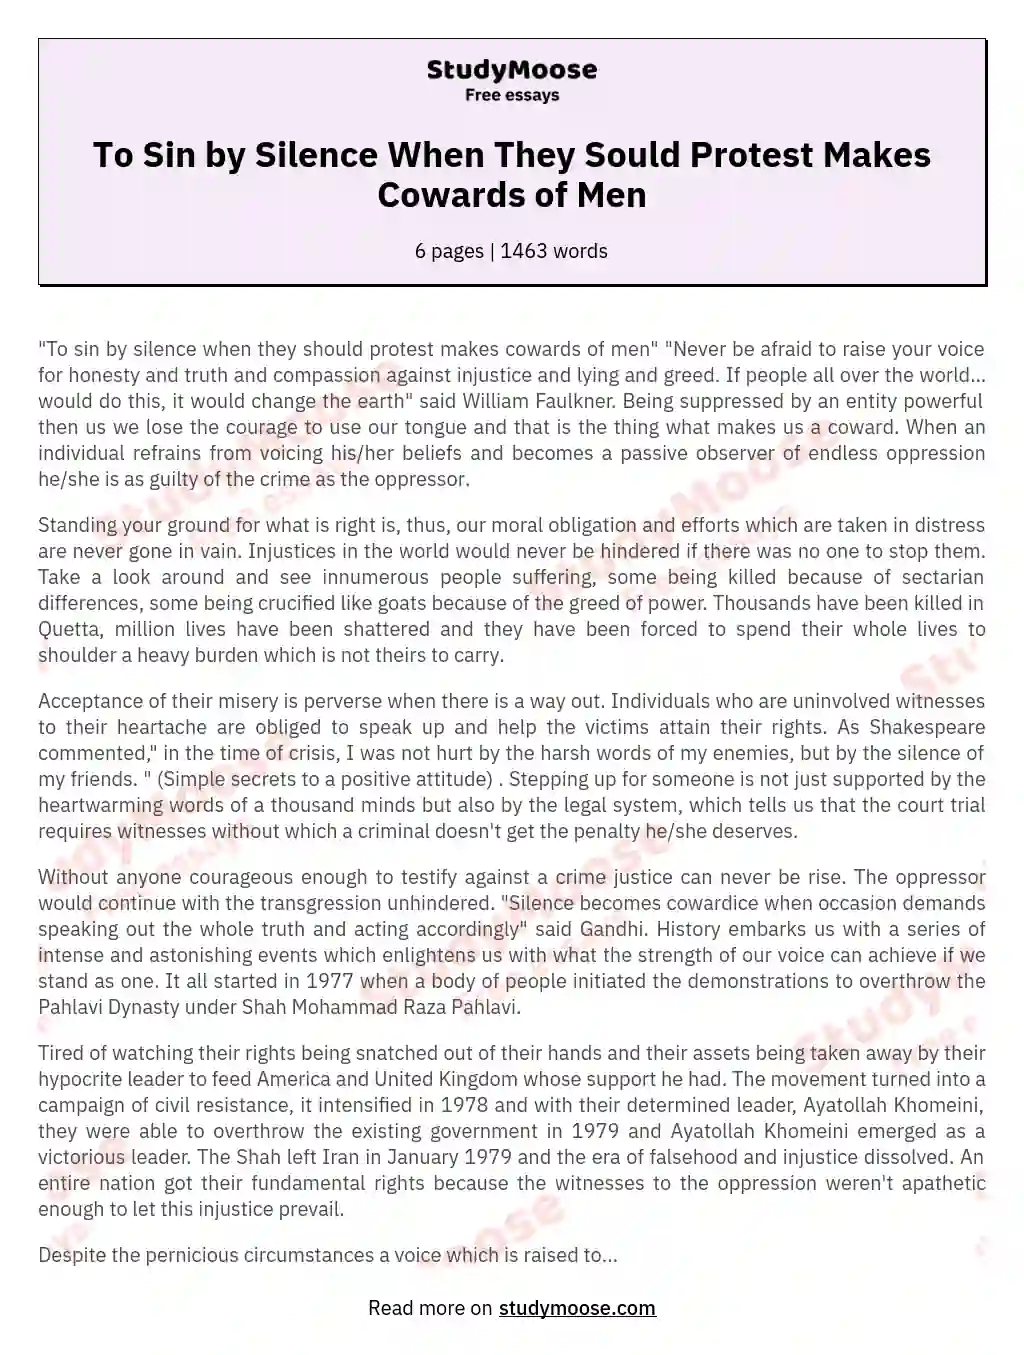 To Sin by Silence When They Sould Protest Makes Cowards of Men essay